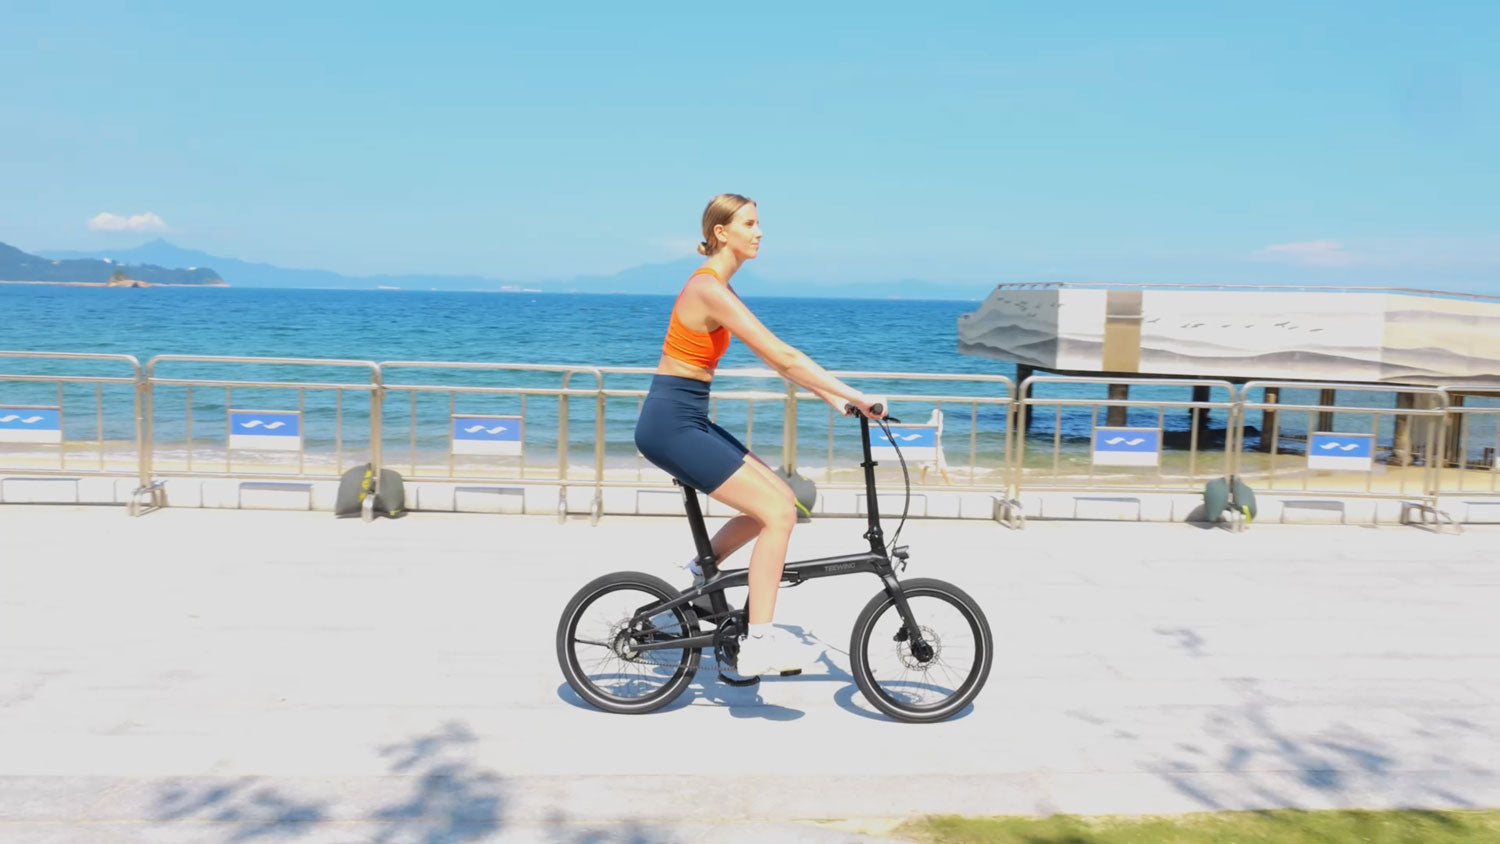 Load video: Outdoor Riding of Teewing T20 Carbon Fiber Electric Bike